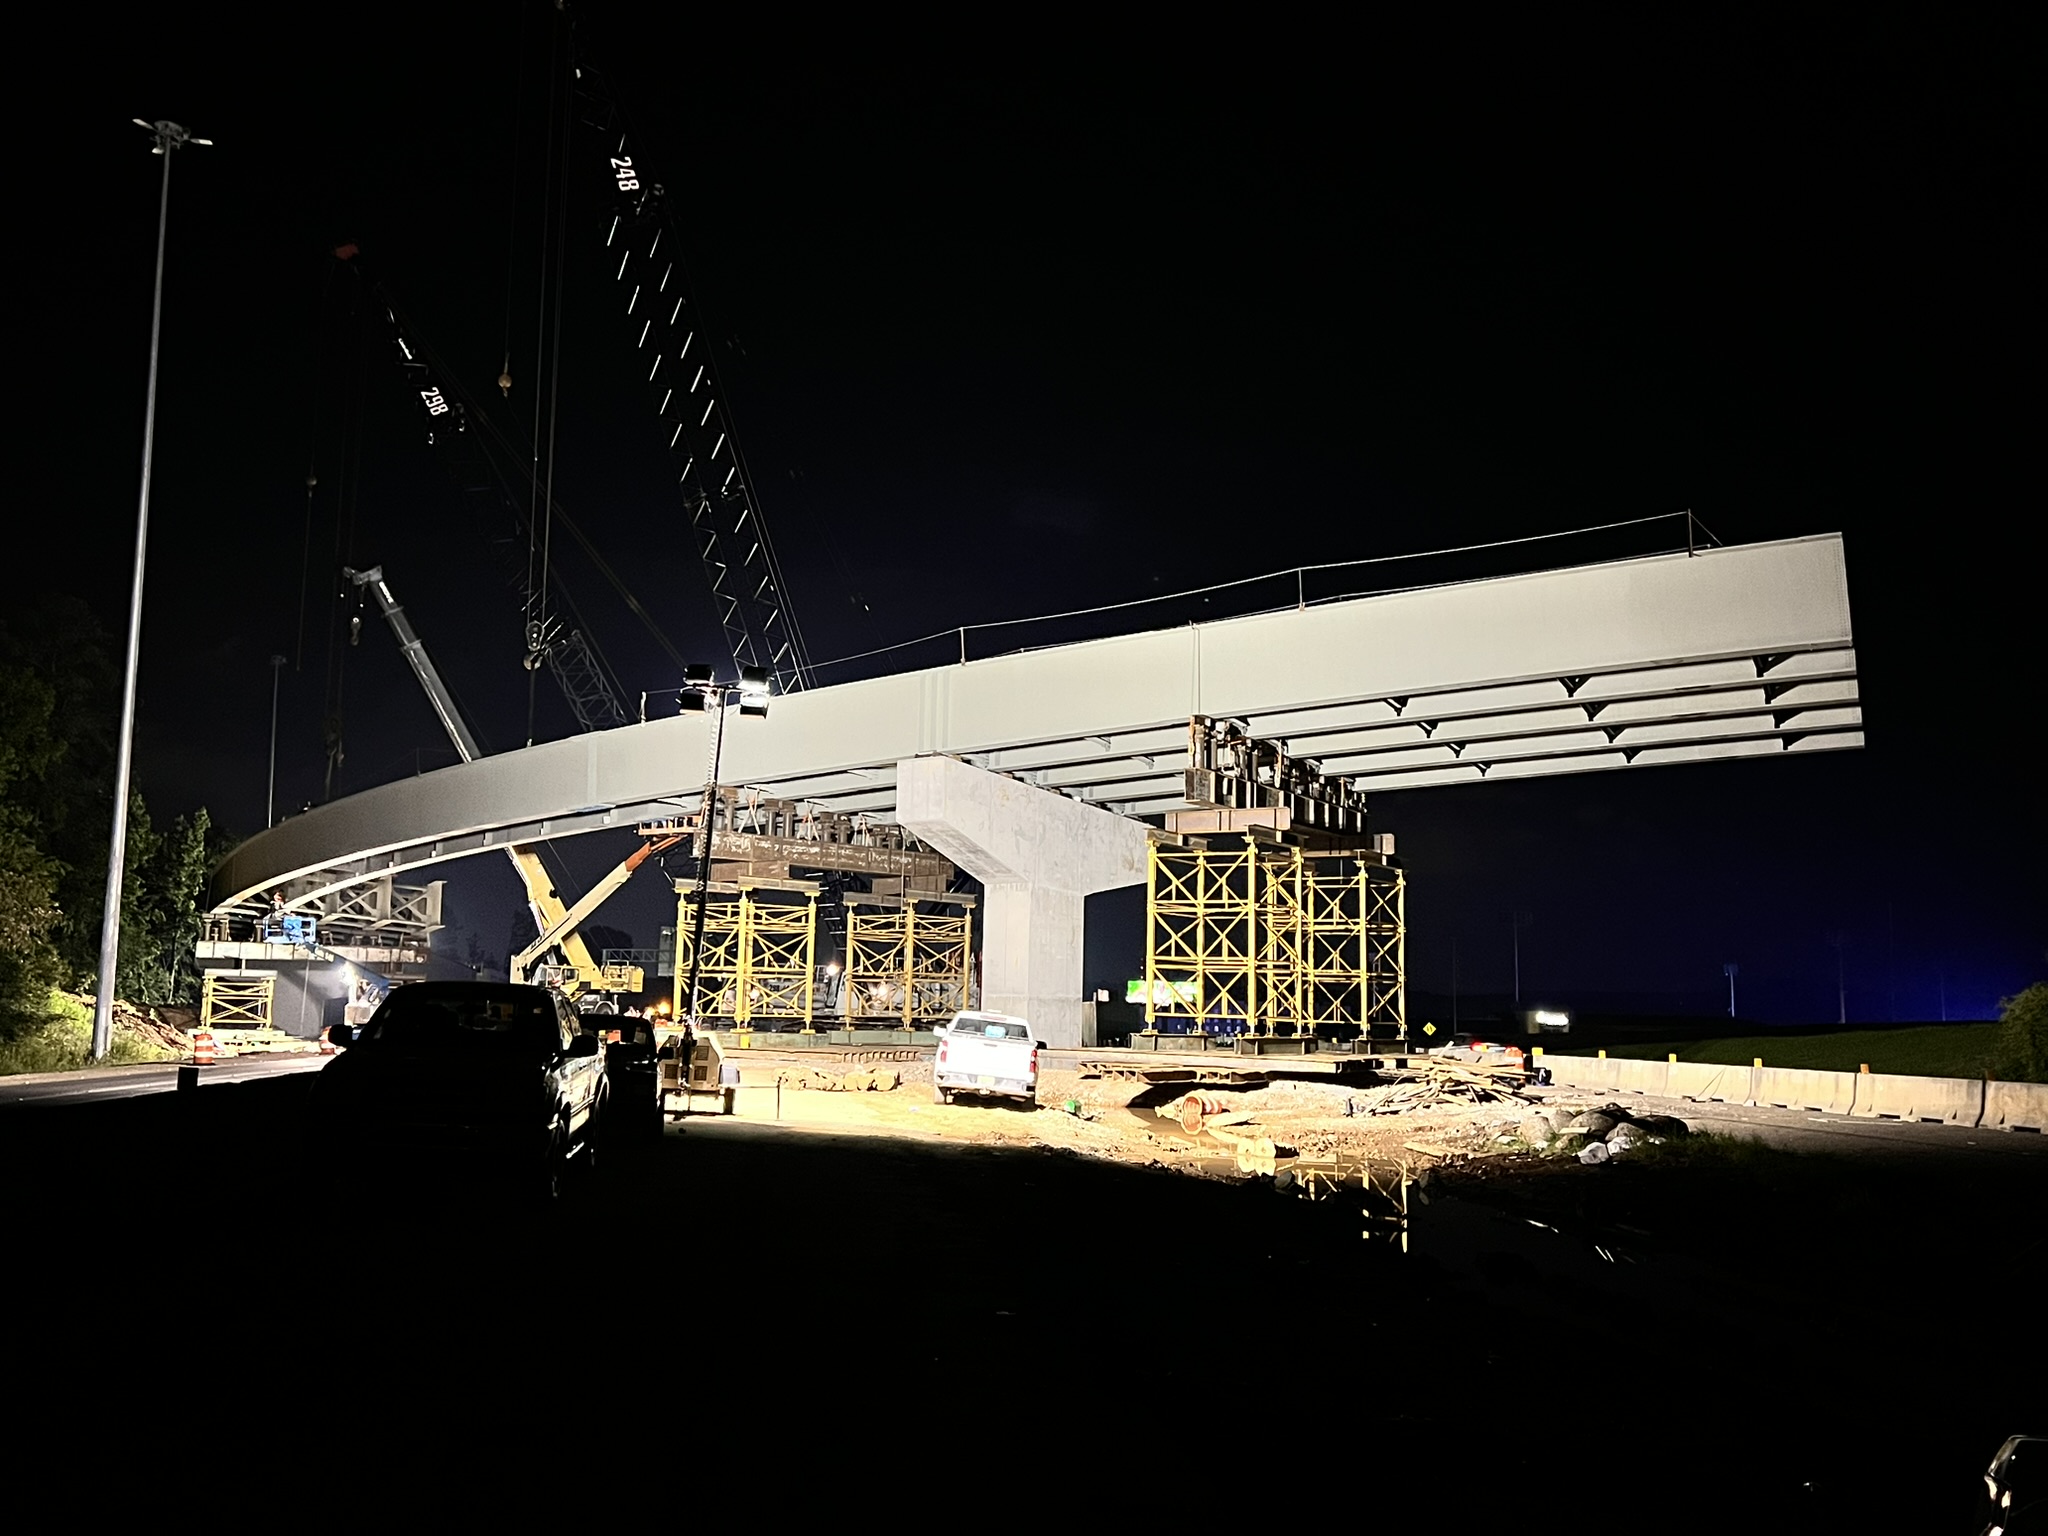 The bridge structure is well-lit against a dark background as nighttime work takes place.